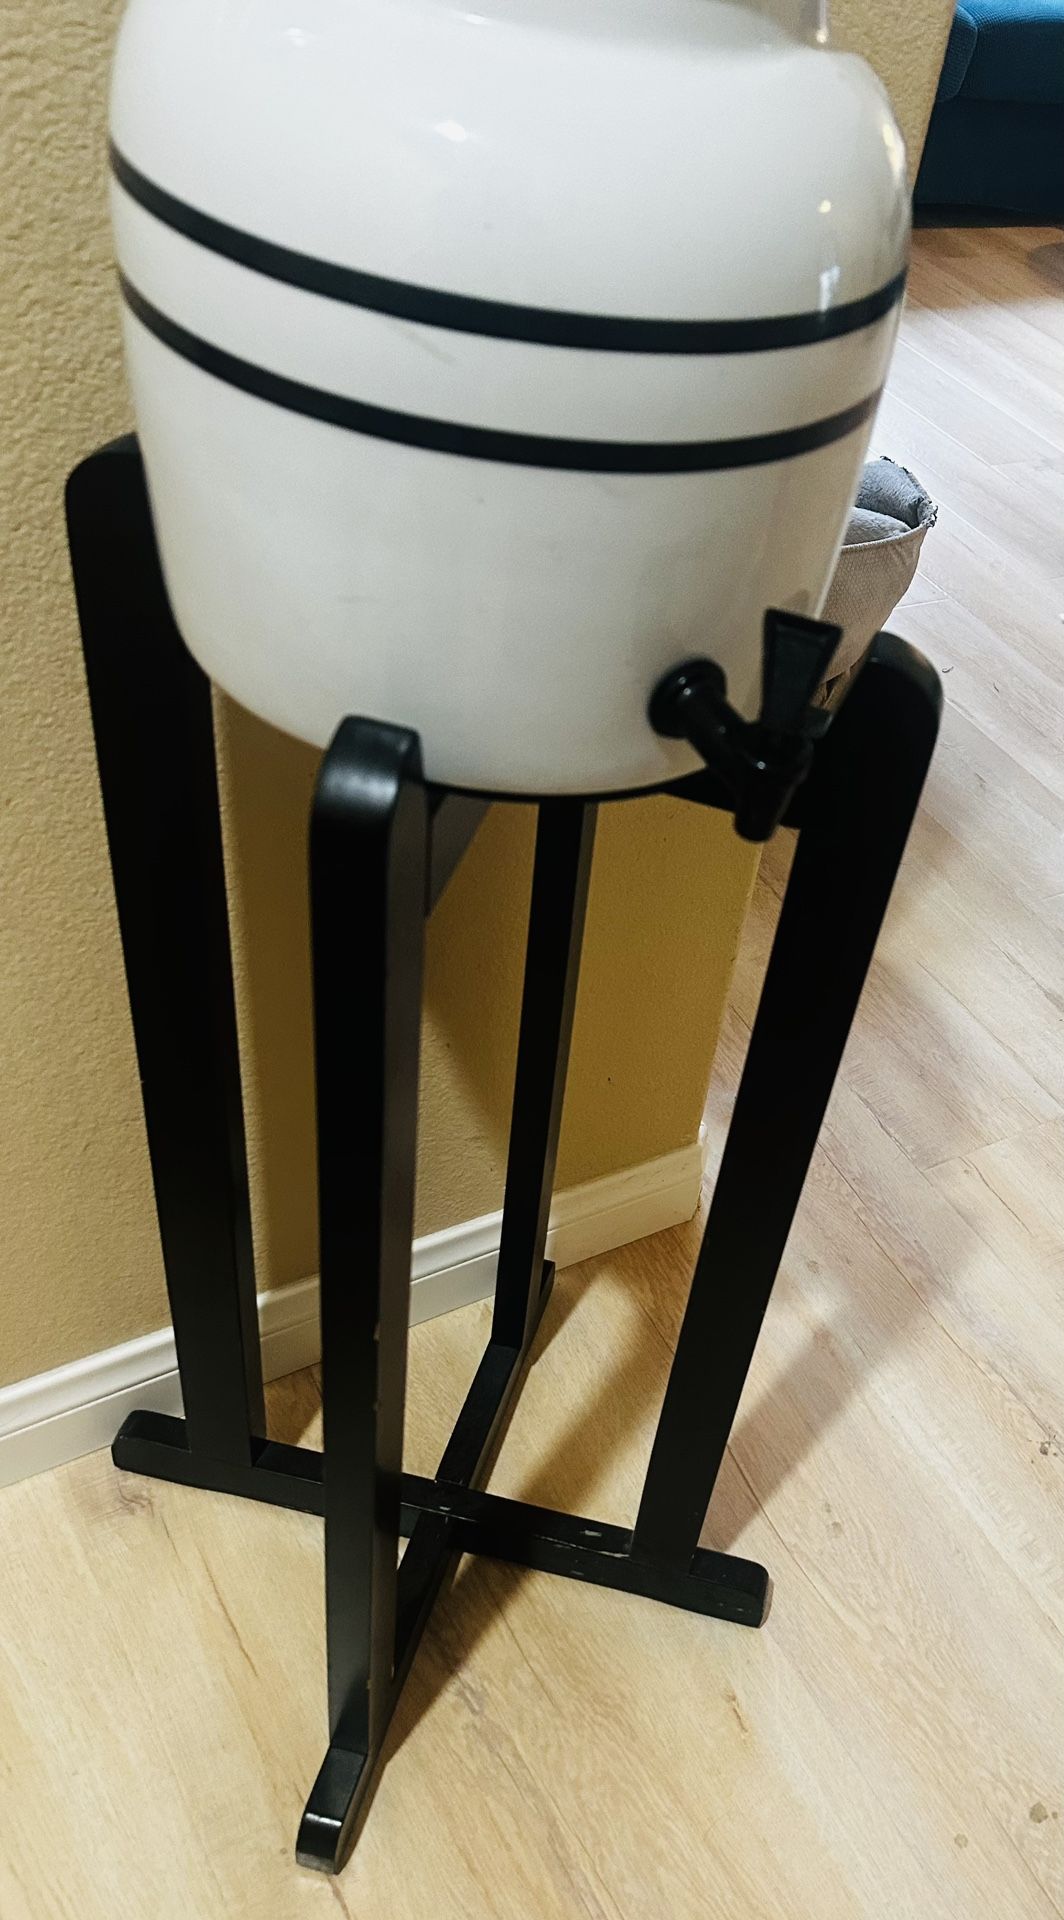 Water Stand And Water Holder (BEST OFFER)